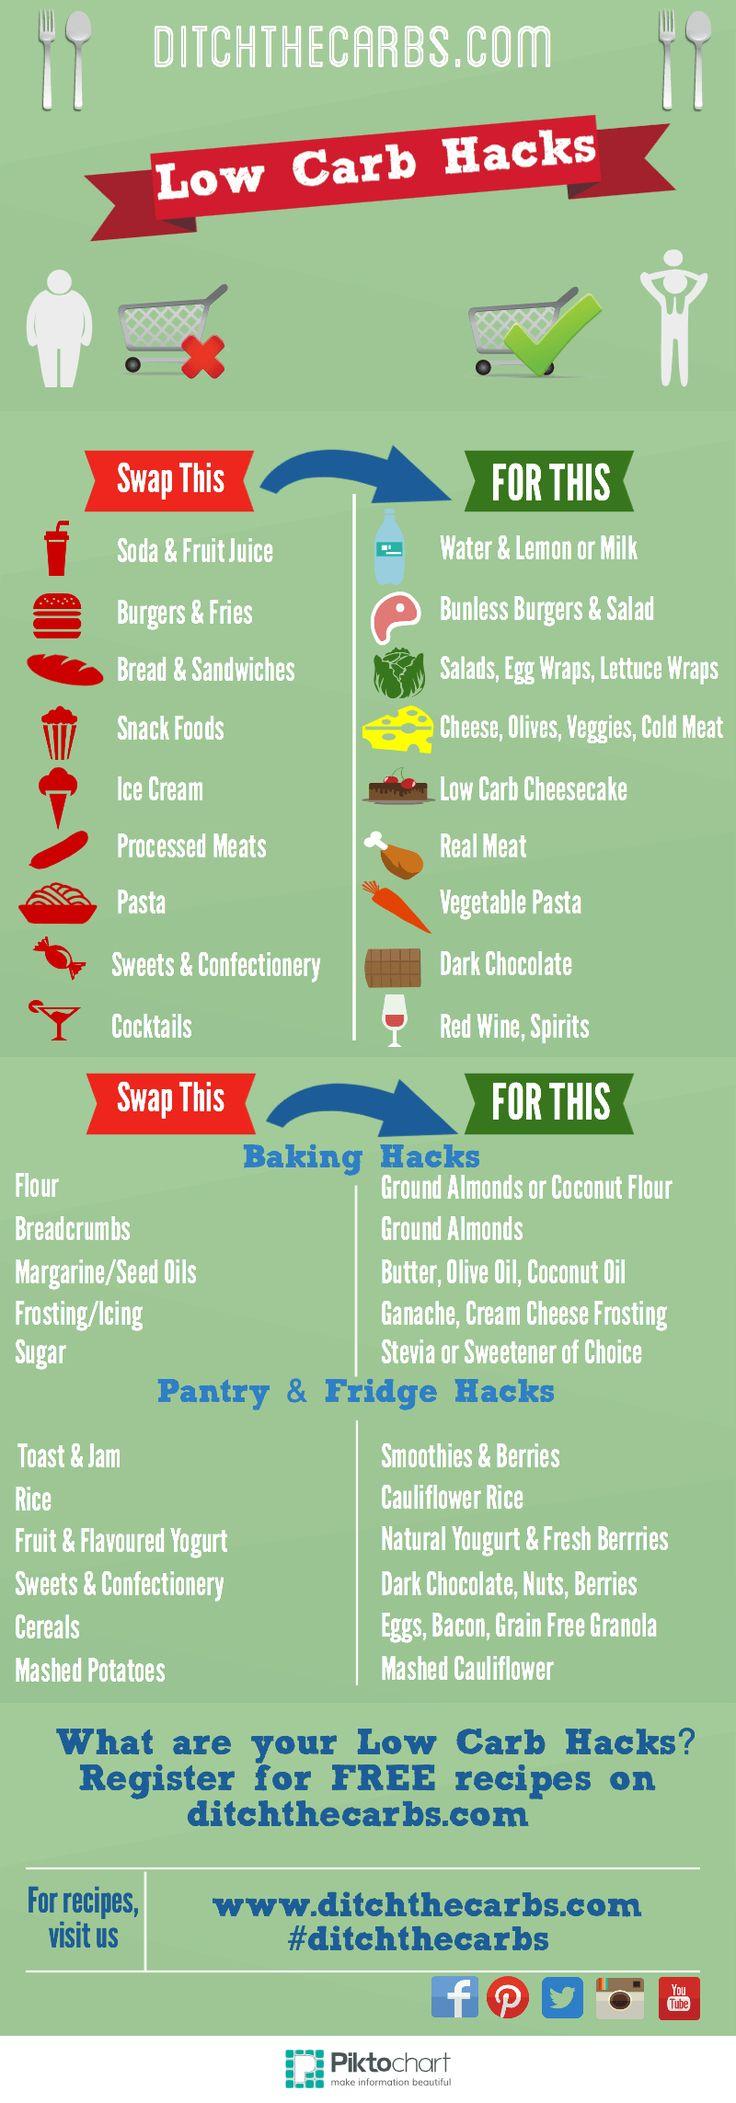 Wedding - Low Carb Hacks - Makes Going Low Carb So Much Easier.